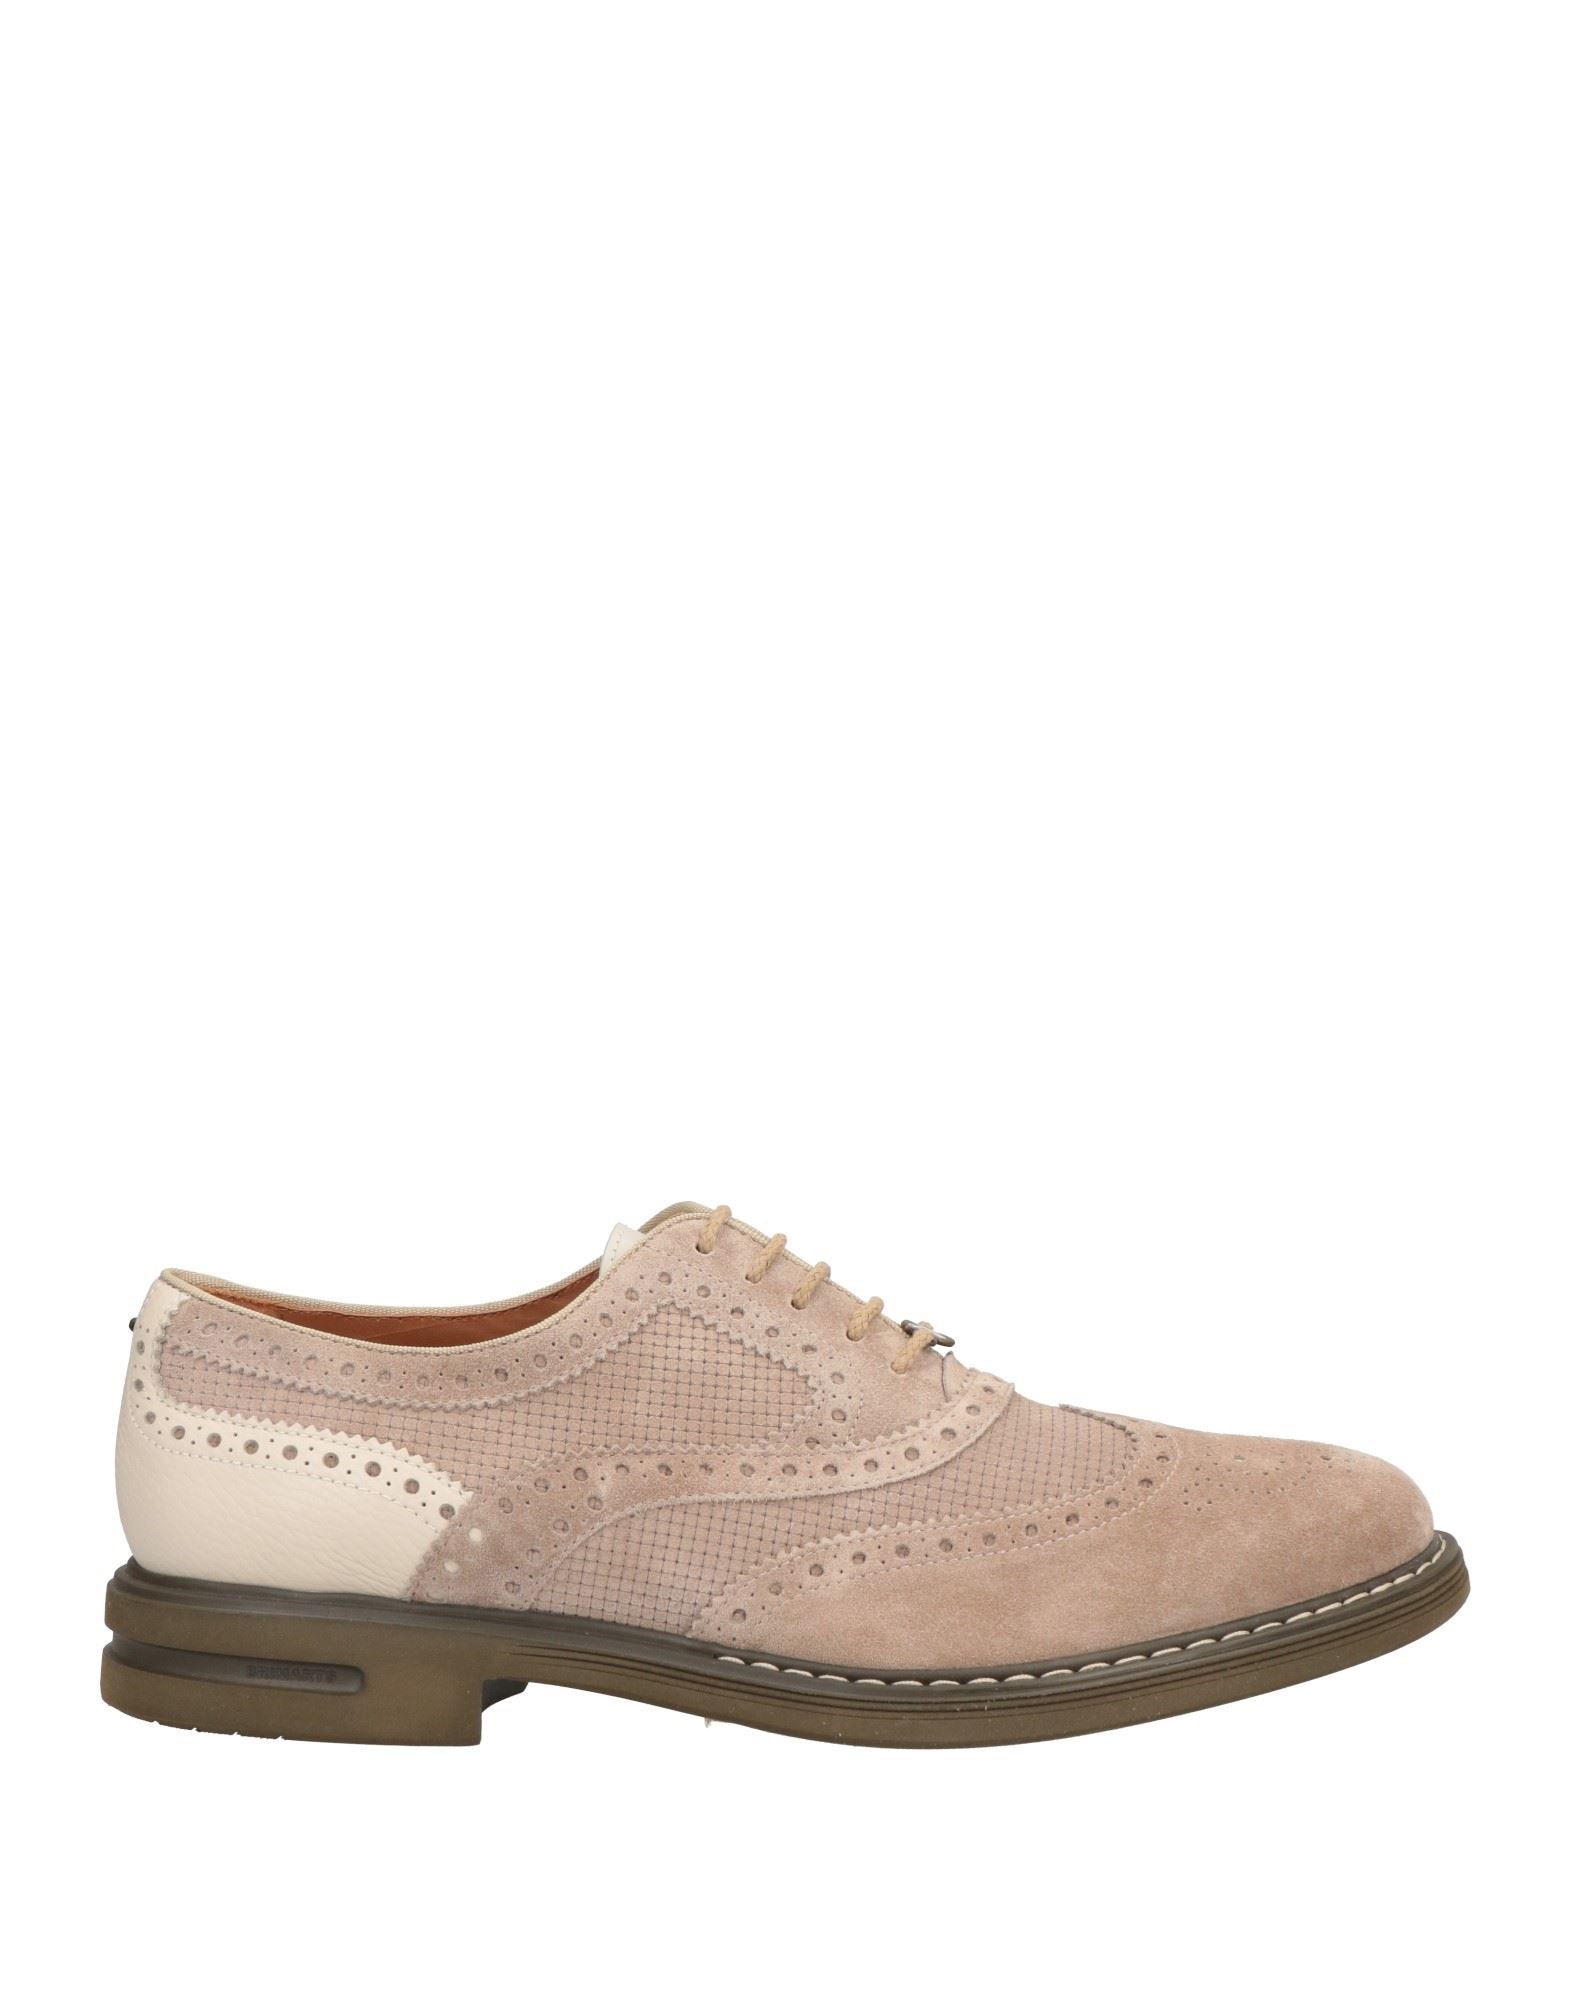 Womens Shoes Flats and flat shoes Lace Up shoes and boots Alberto Guardiani Leather Lace-up Shoes in Beige Natural 